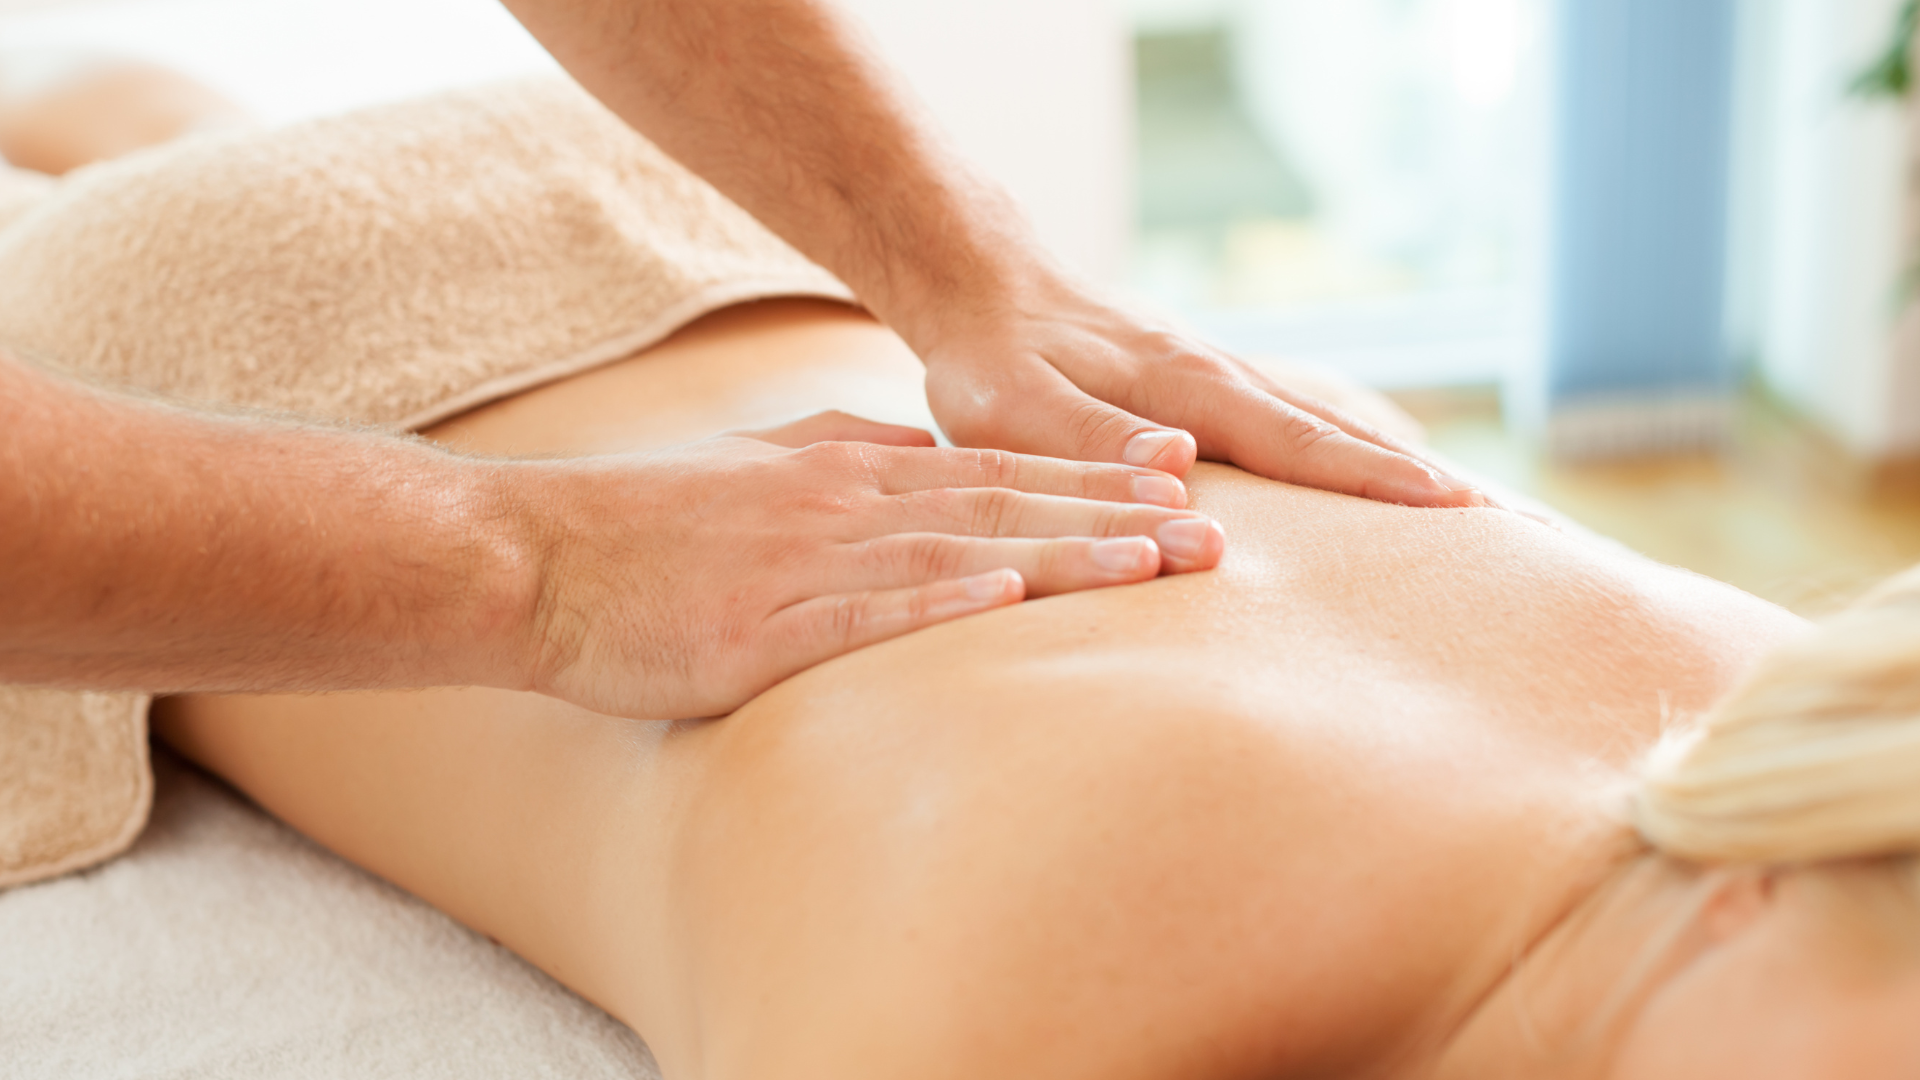 both swedish massage and lomi lomi forms of massage feature long flowing movements